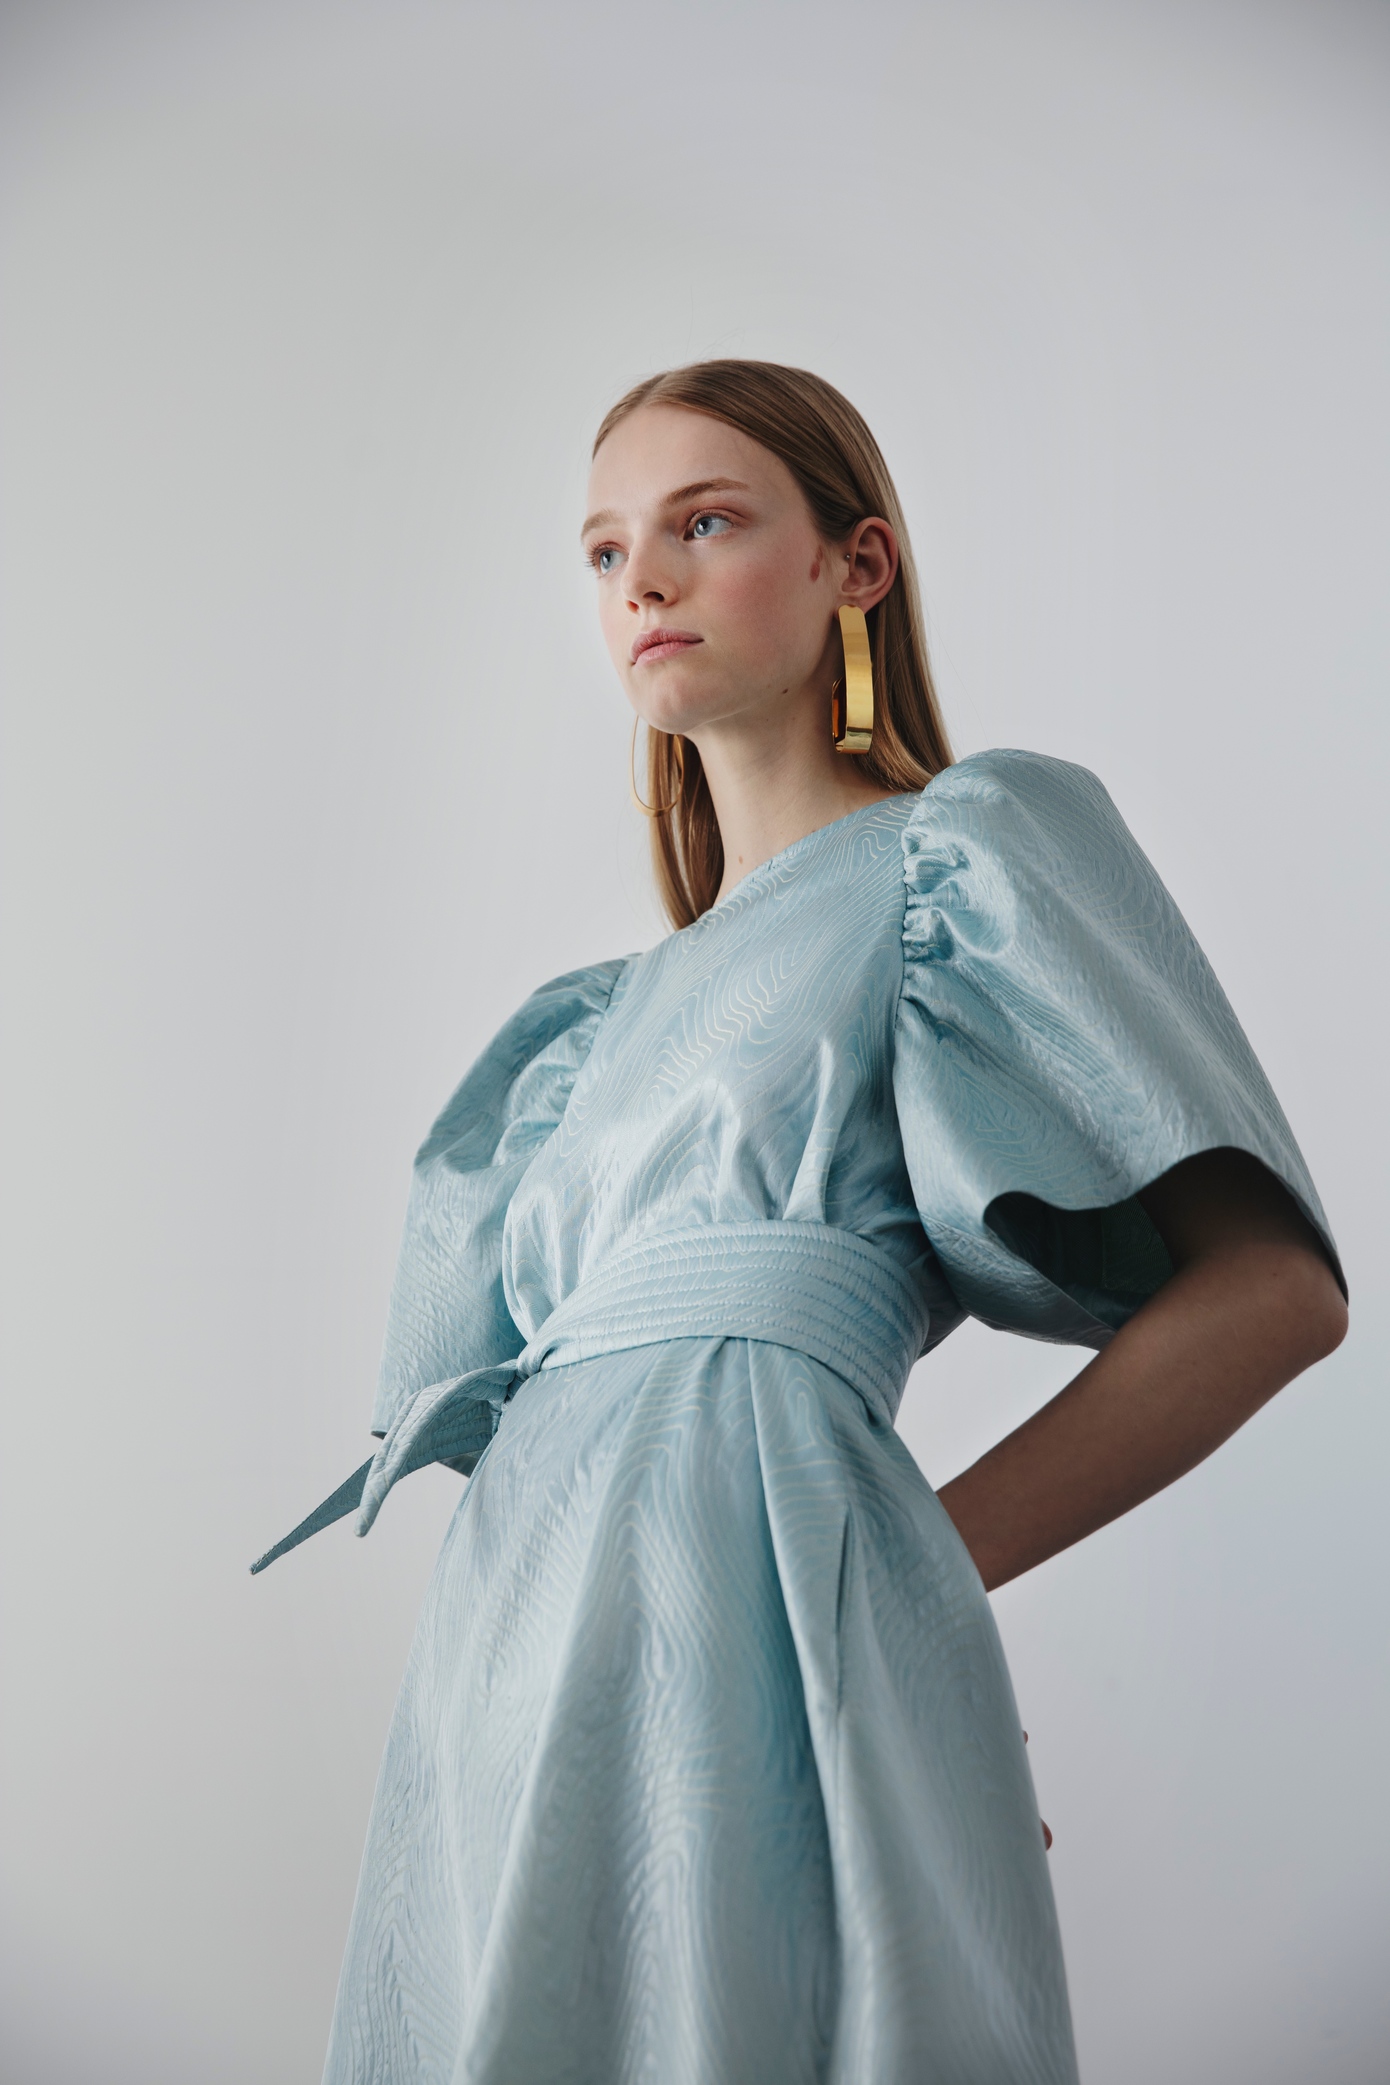 Fashion designer Nynne Kunde on her SS21 collection for NYNNE